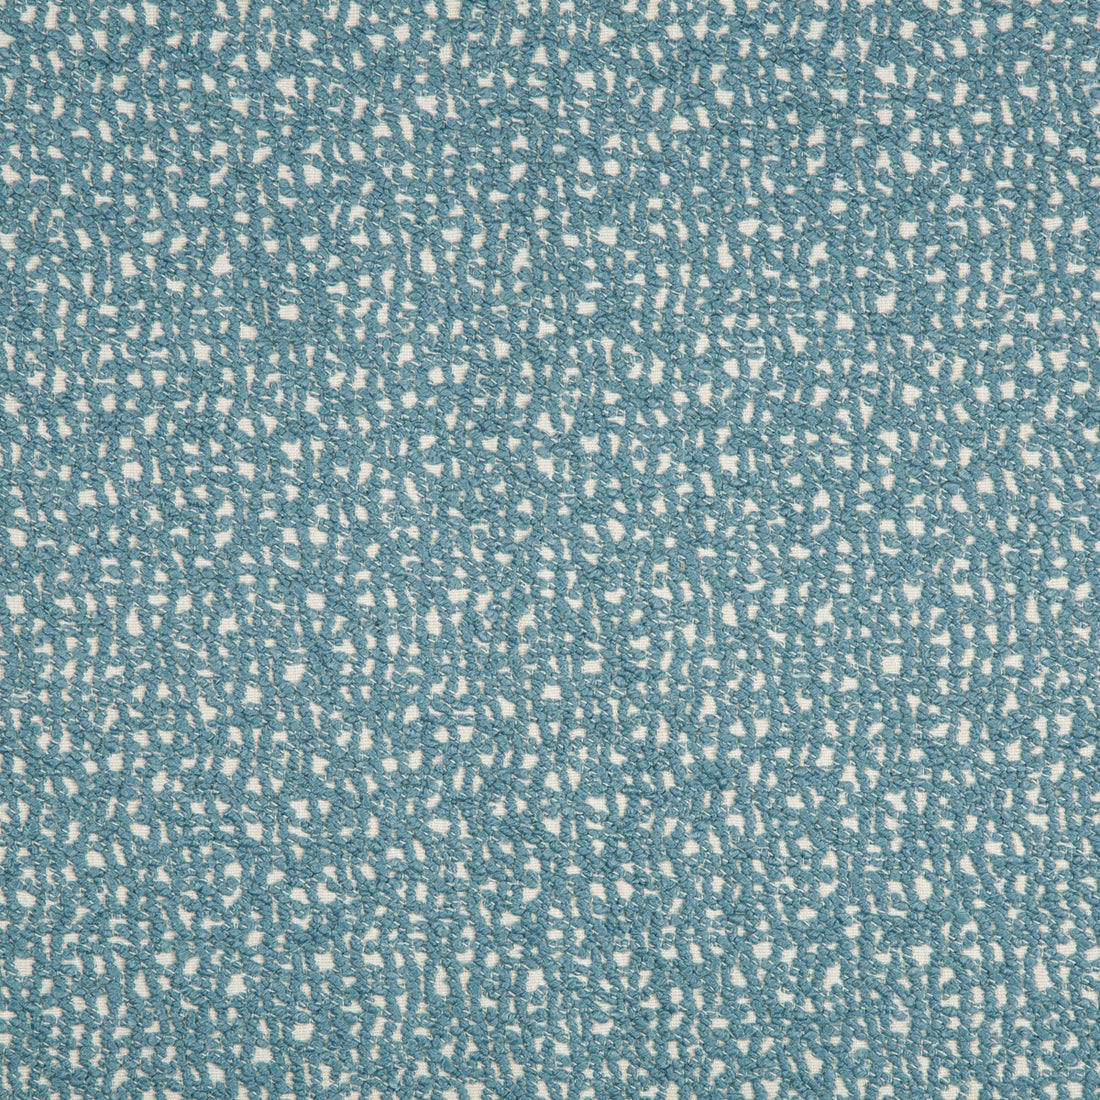 Serra fabric in marine color - pattern GWF-3783.5.0 - by Lee Jofa Modern in the Kelly Wearstler Oculum Indoor/Outdoor collection